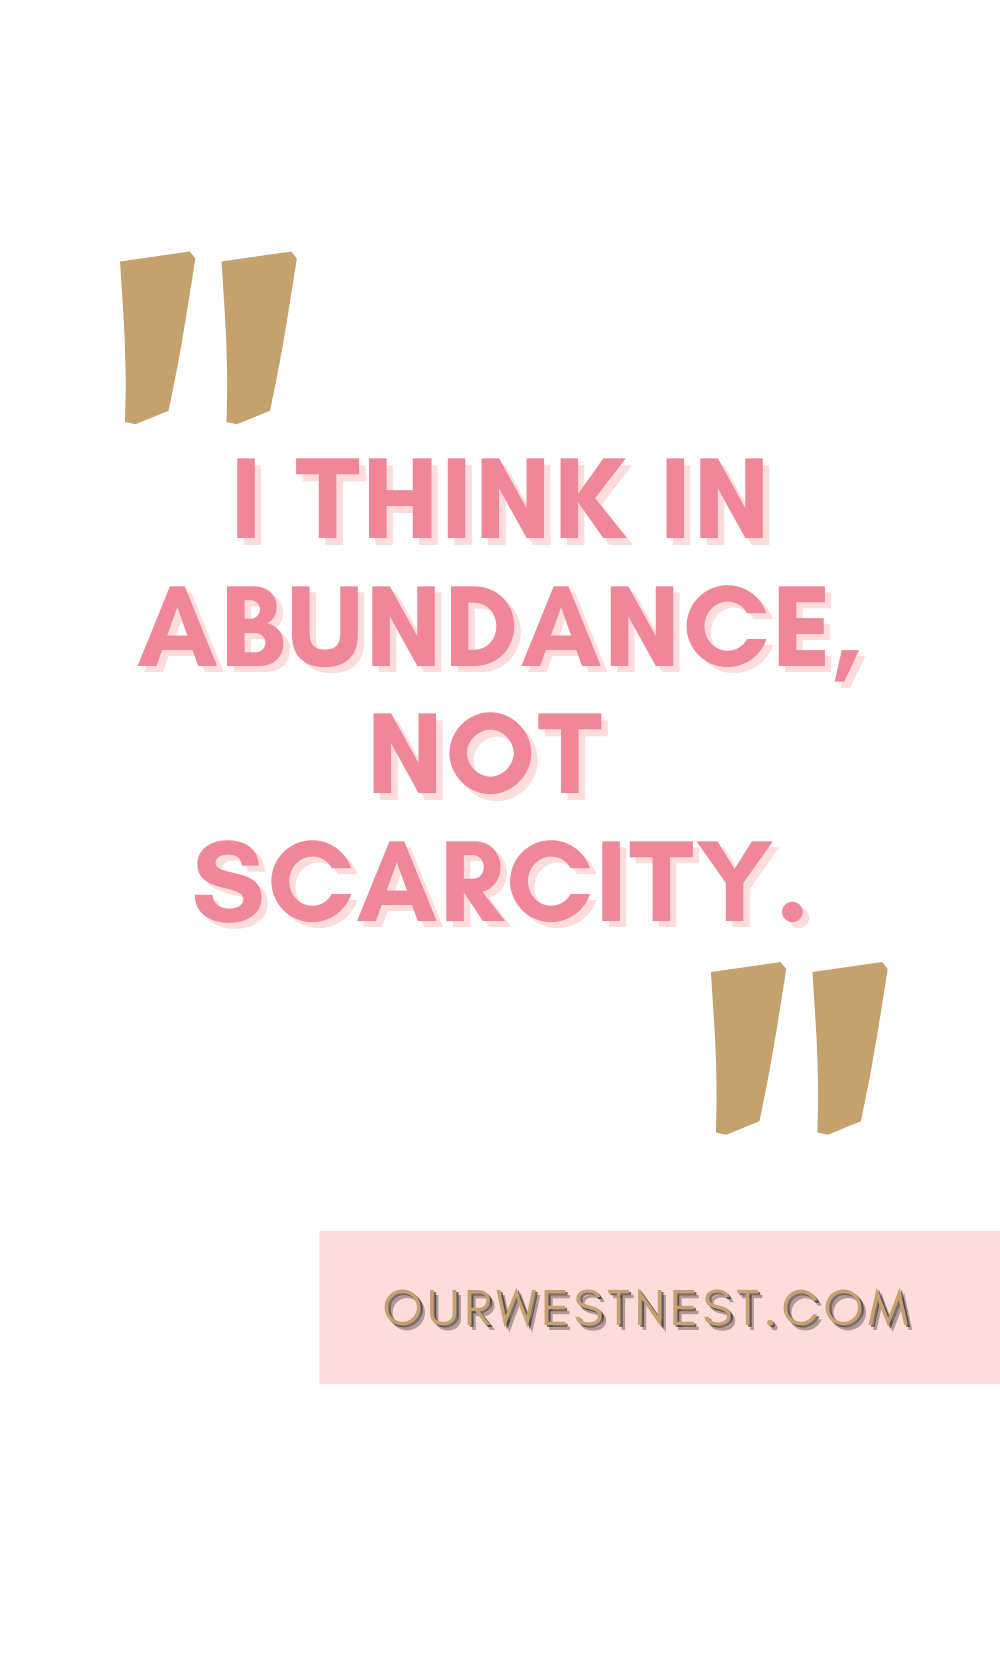 55 Morning Affirmations And Quotes For Black Women To Empower Themselves Daily Our West Nest